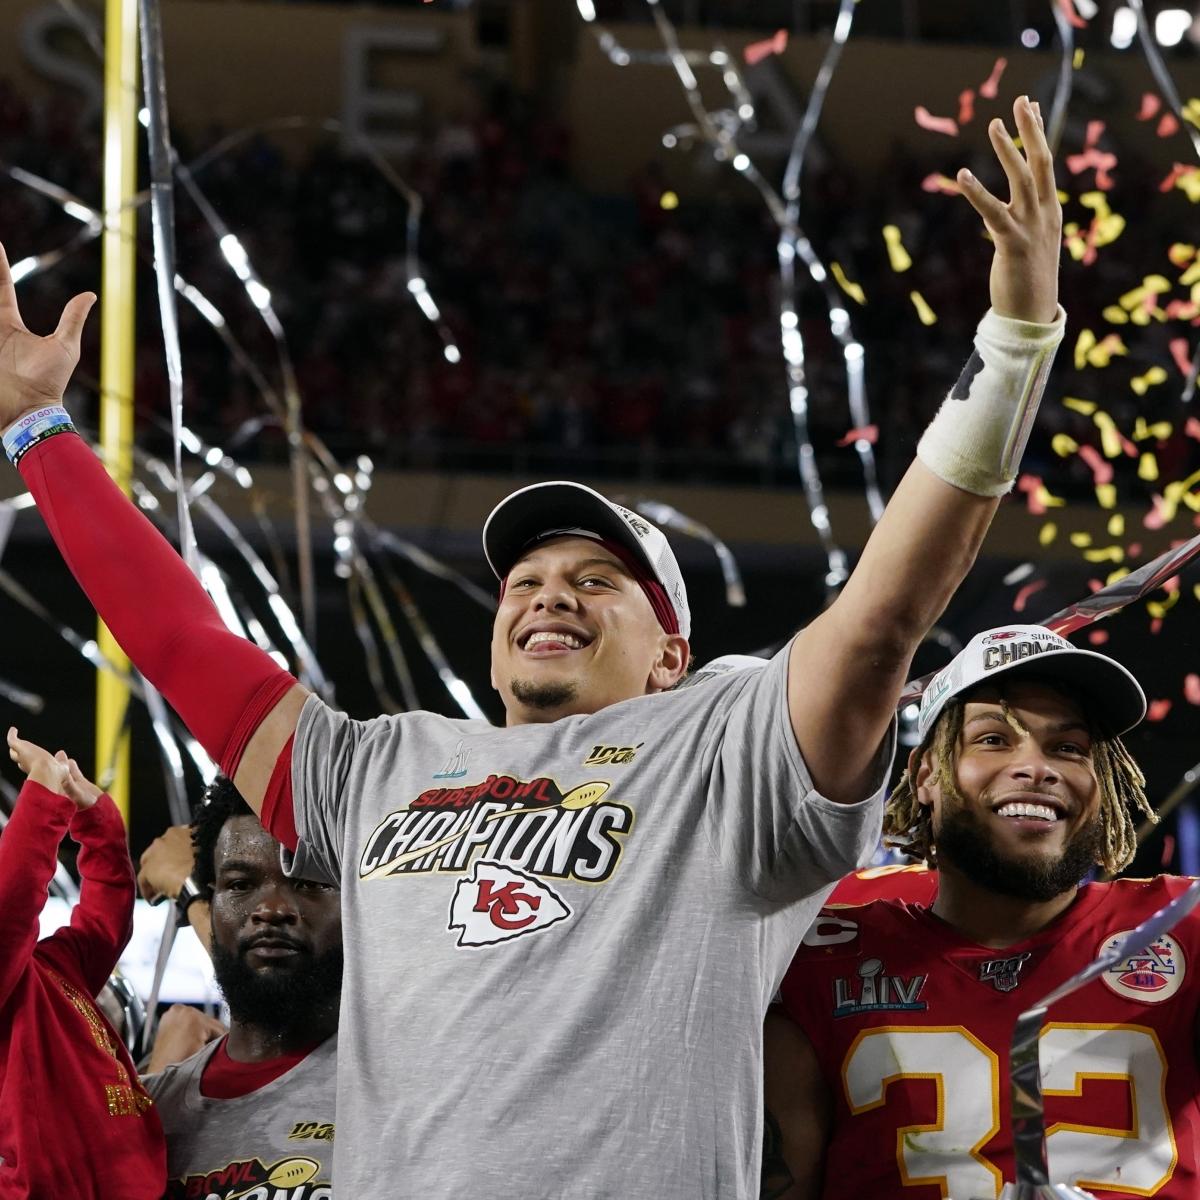 Chiefs Parade 2020: Date, Route, Expectations After Super Bowl Win ...